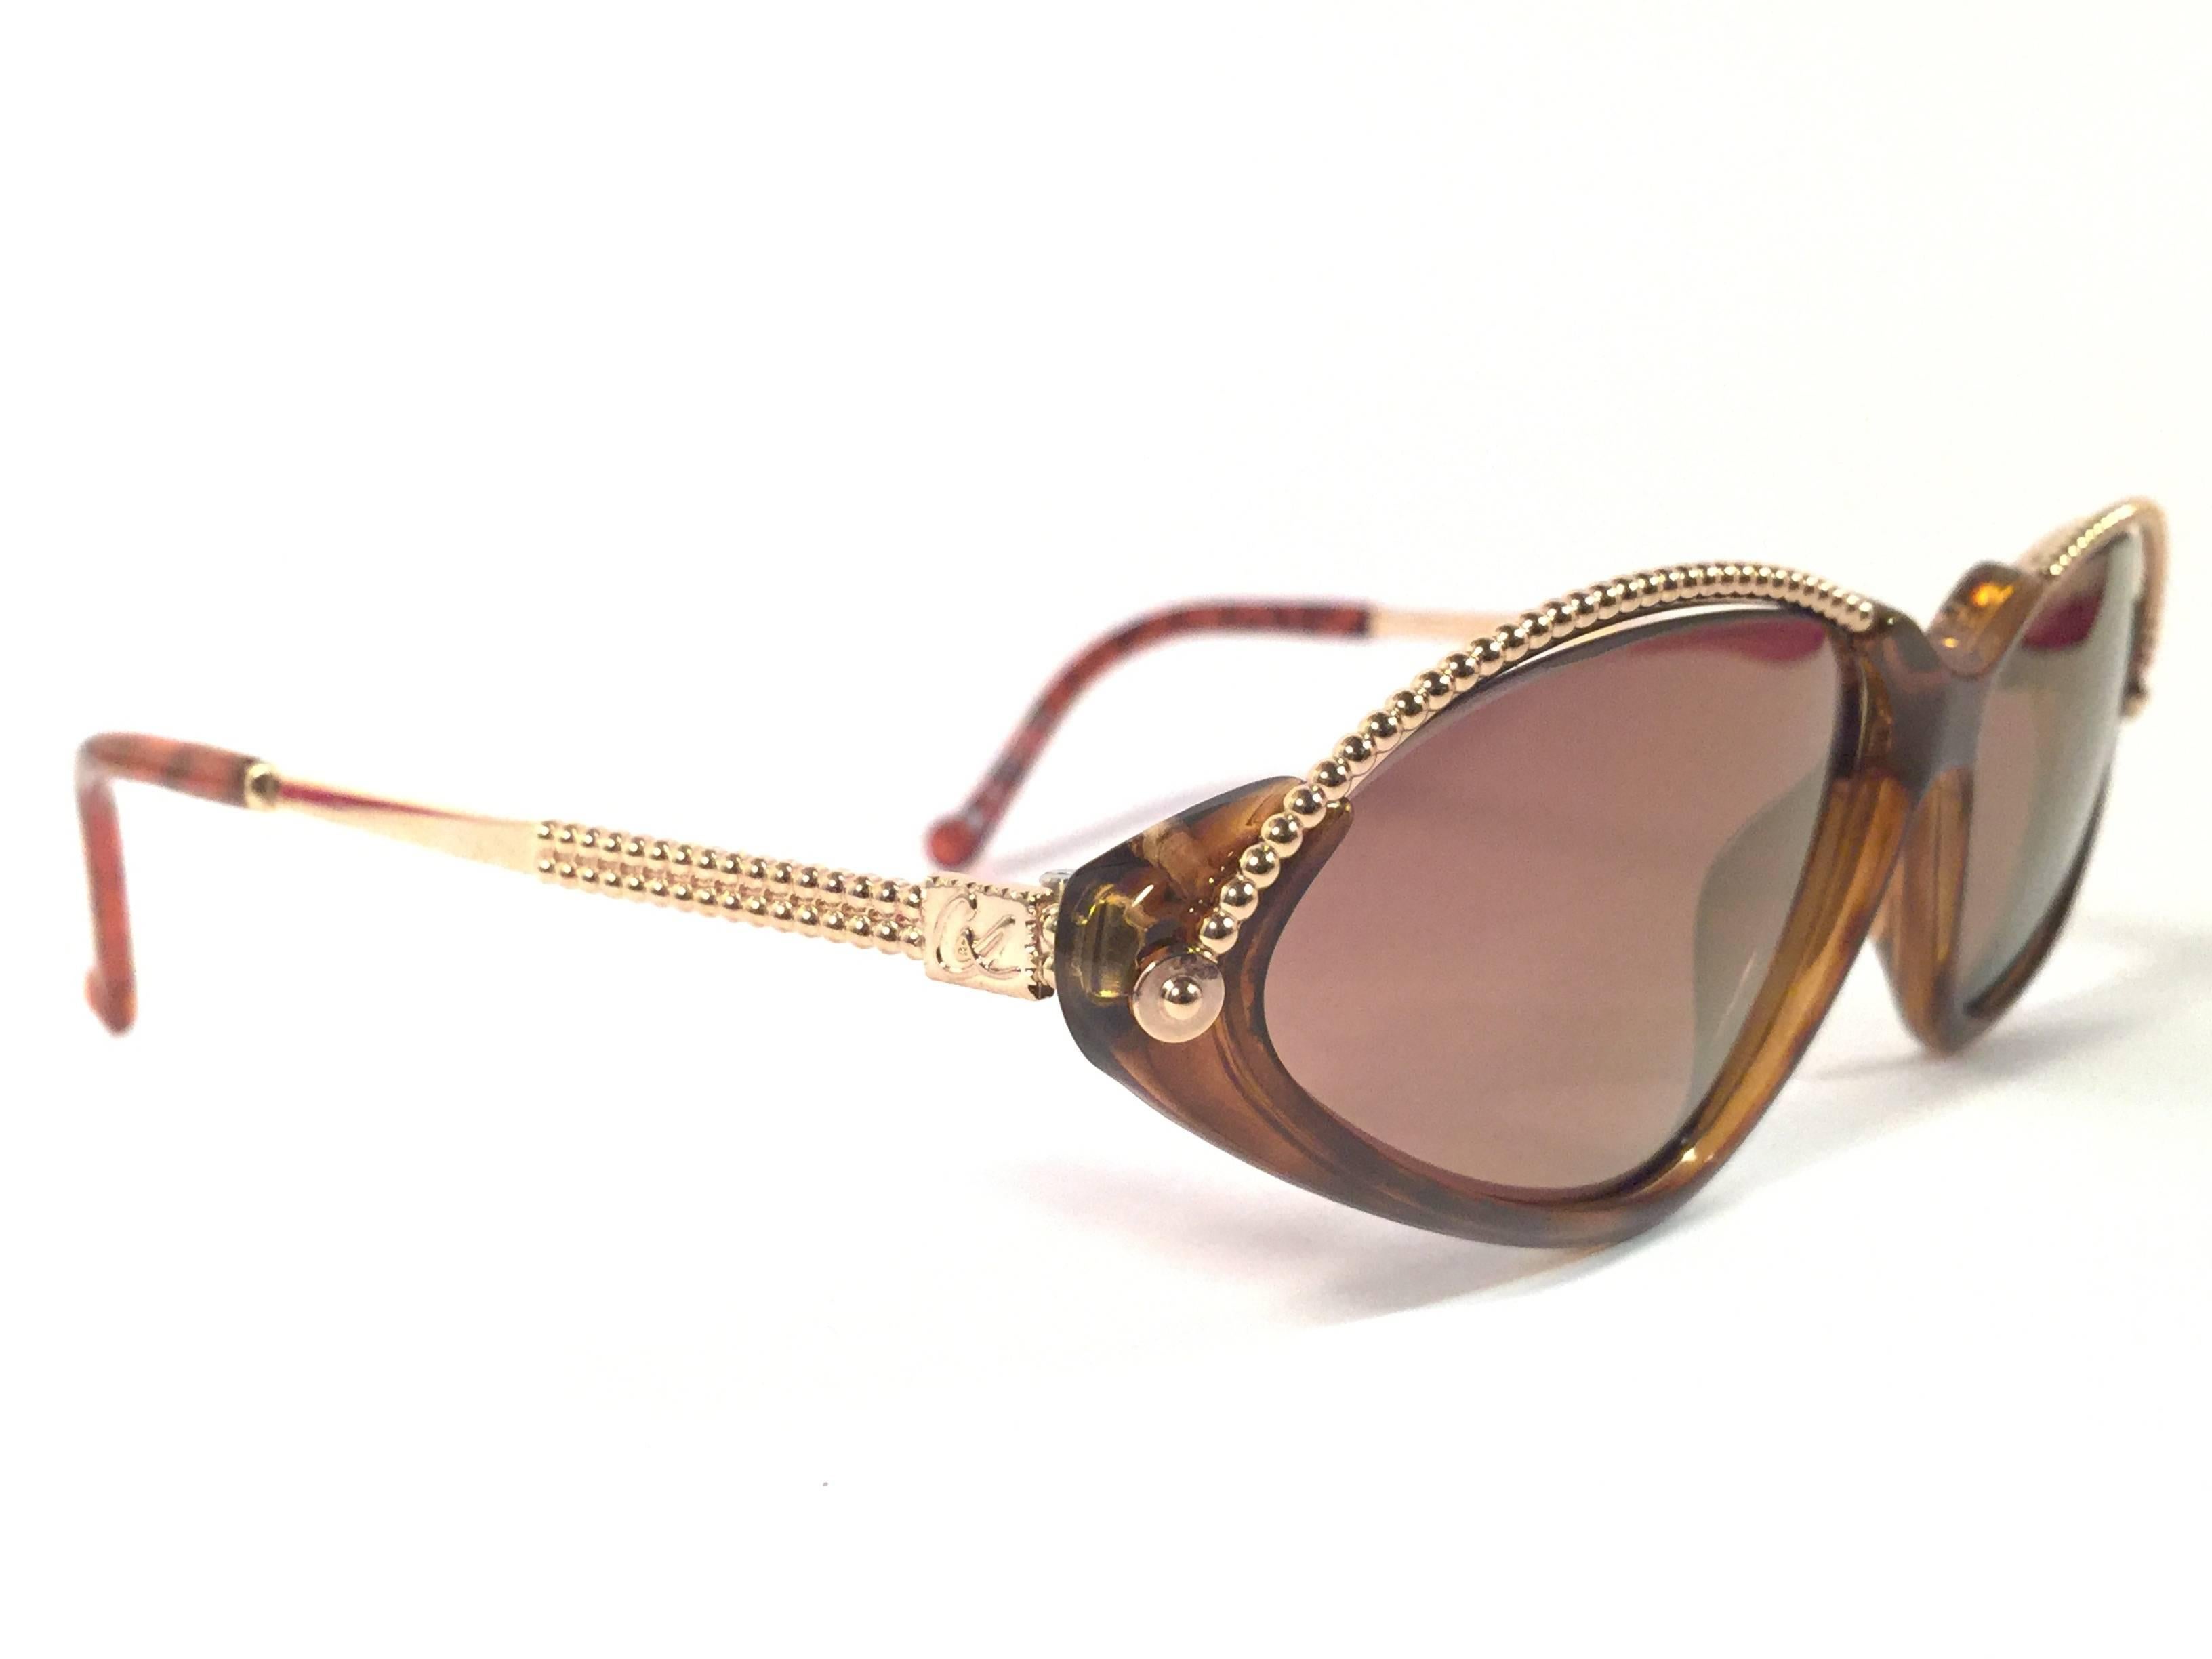 Rare pair of New vintage Christian Lacroix sunglasses. 

Tortoise with elaborated gold accents, cat eyed shaped frame holding a pair of spotless dark amber lenses.

New, never worn or displayed. Made in France.
